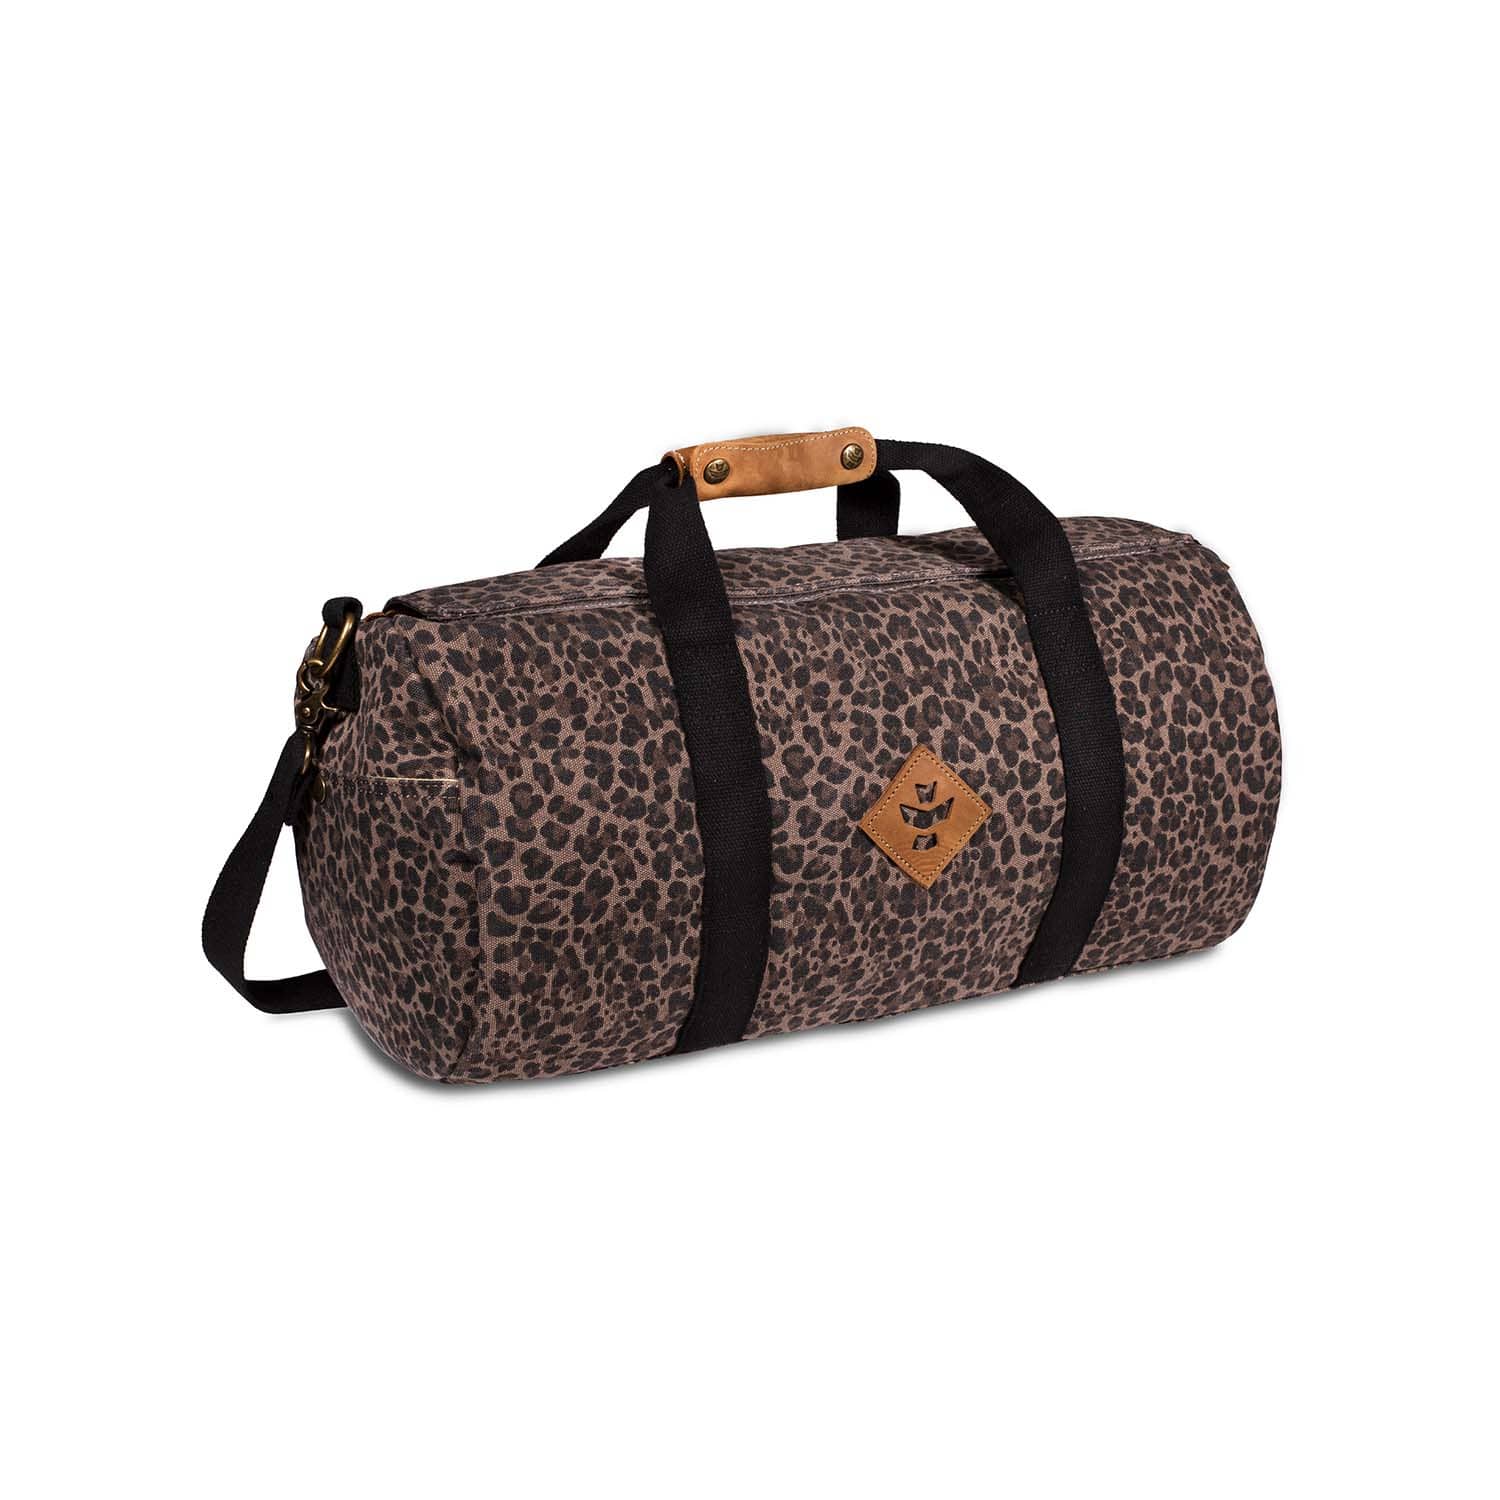 Revelry Supply Travel Bag Leopard The Overnighter - Smell Proof Small Duffle